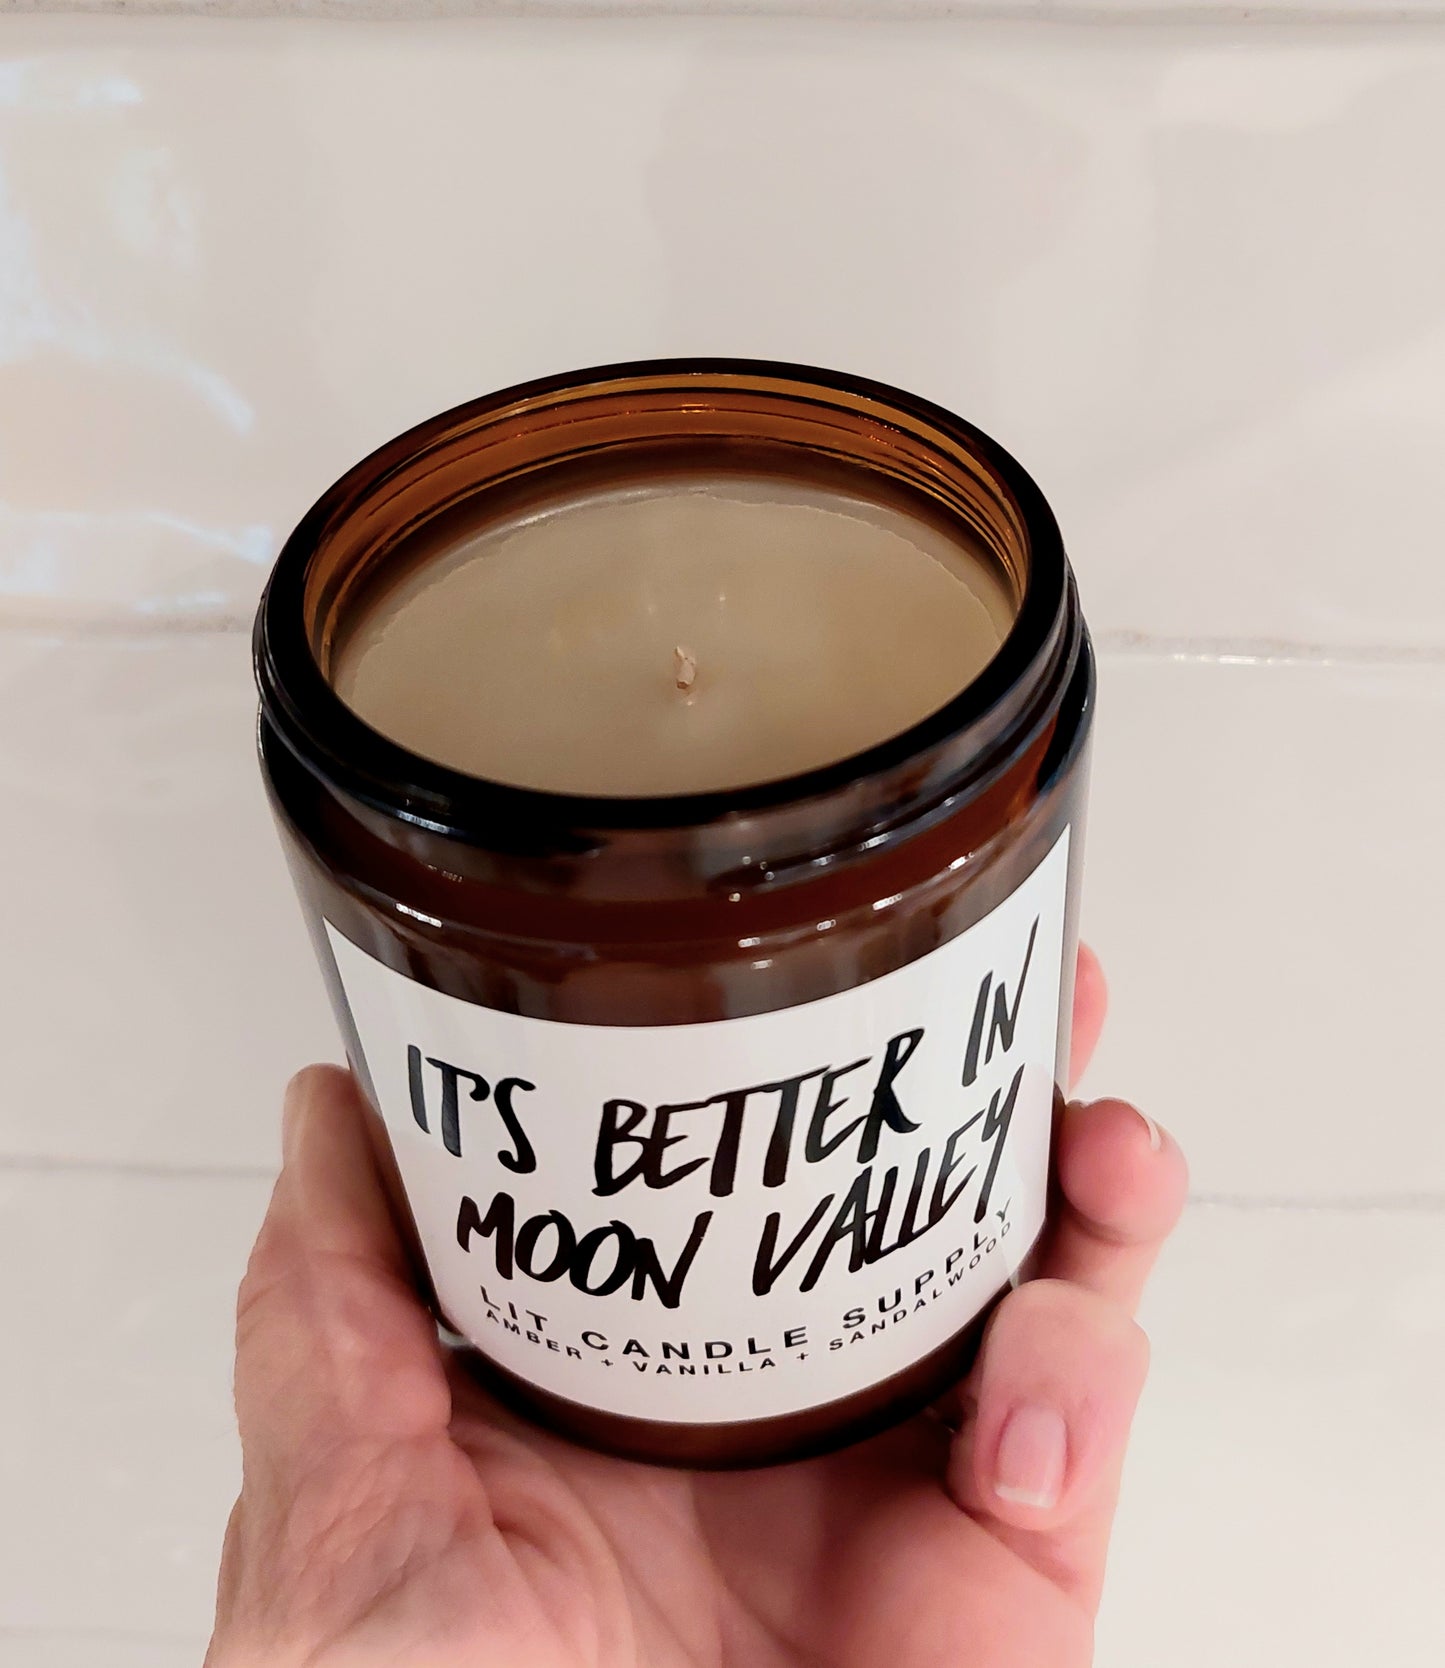 Better In Moon Valley Candle